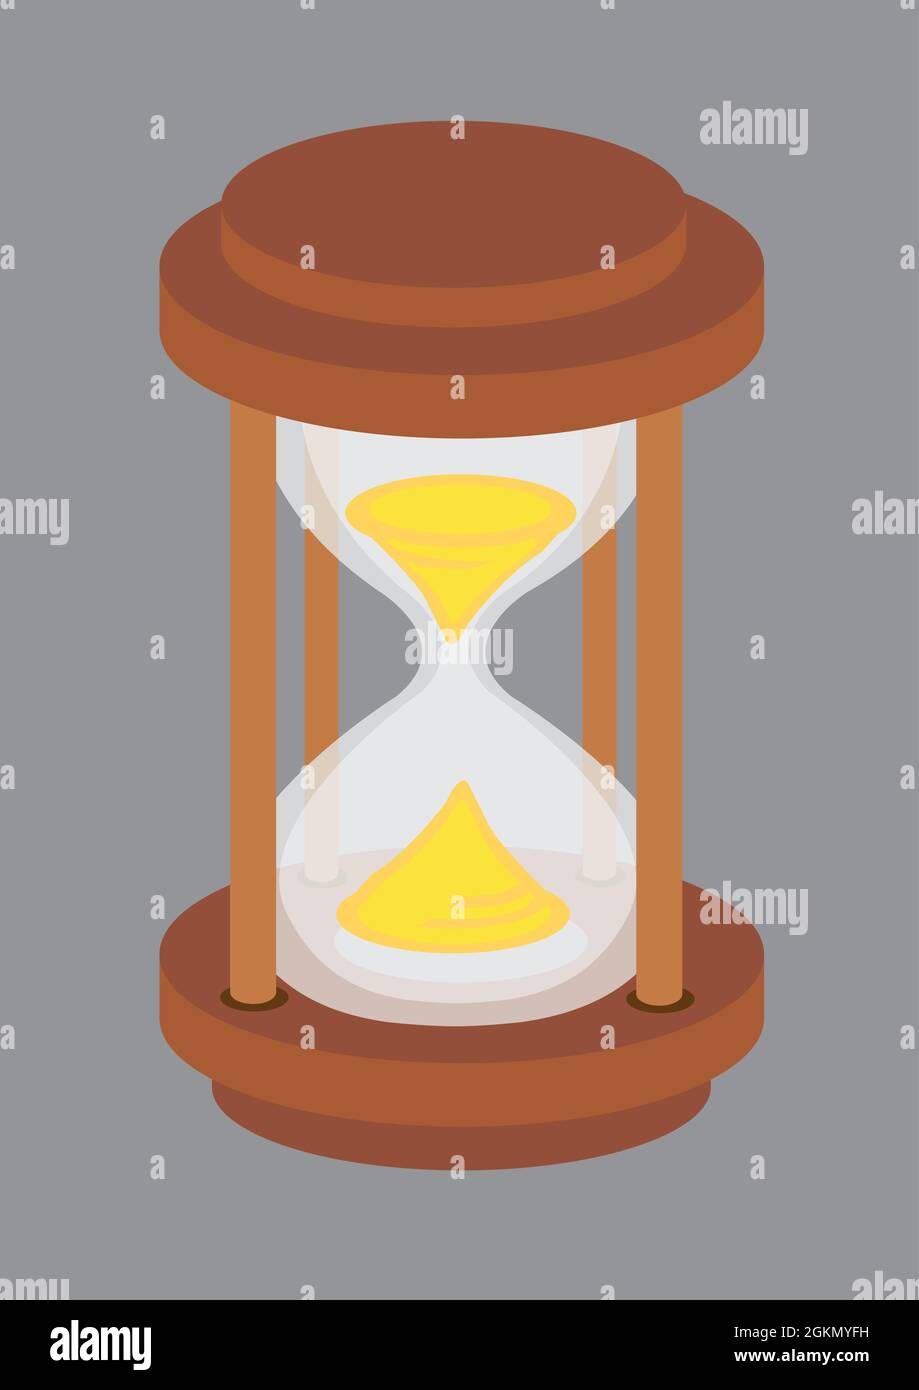 Vector illustration of an old-fashioned wooden hourglass with golden sand viewed from high angle isolated on grey background. Stock Vector